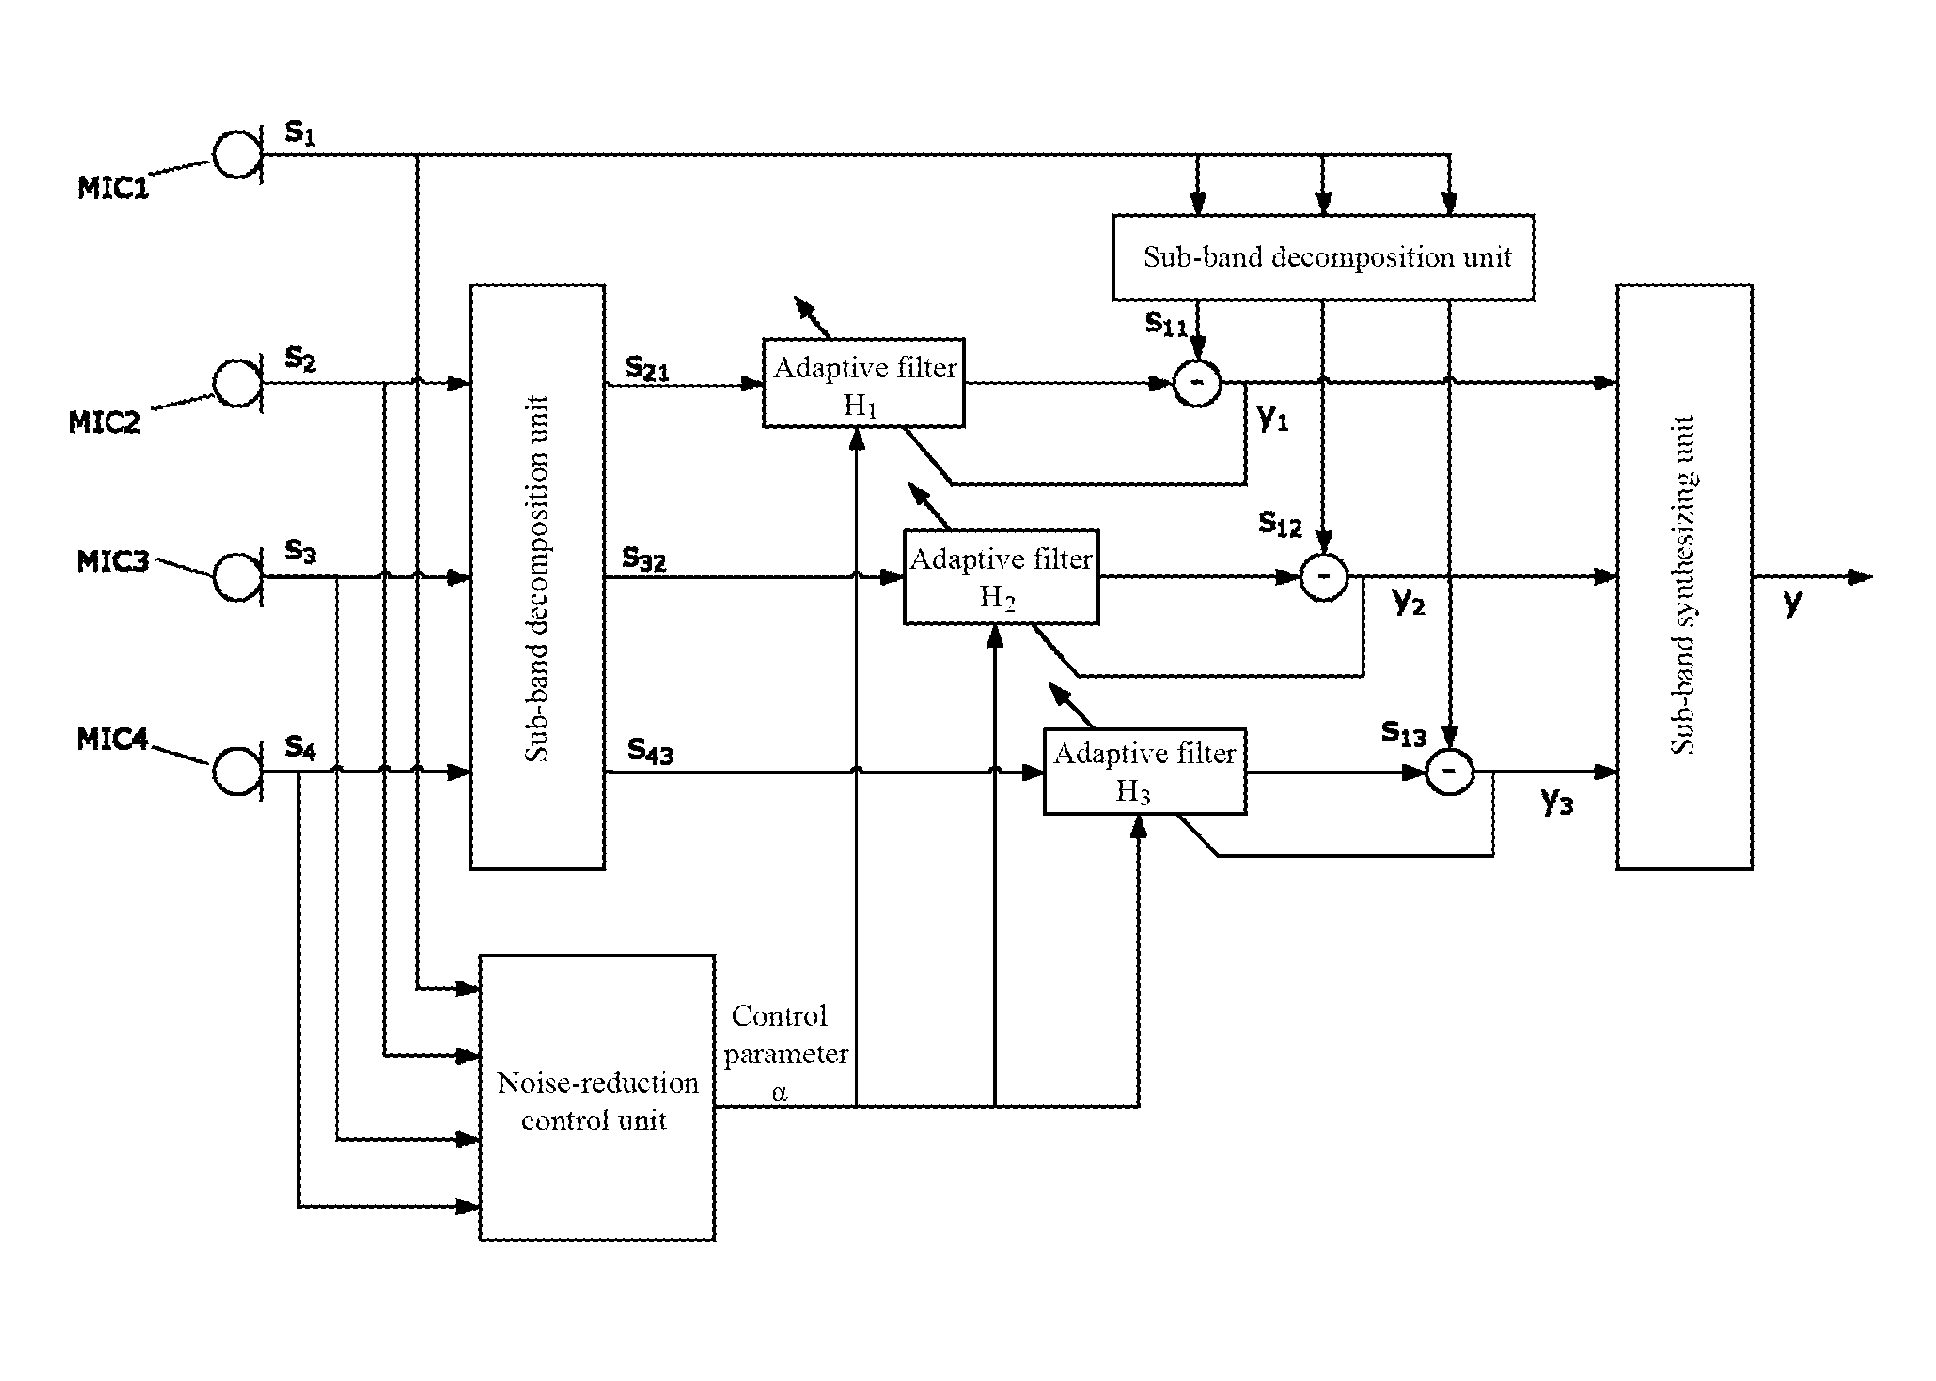 Method, device and system for eliminating noises with multi-microphone array